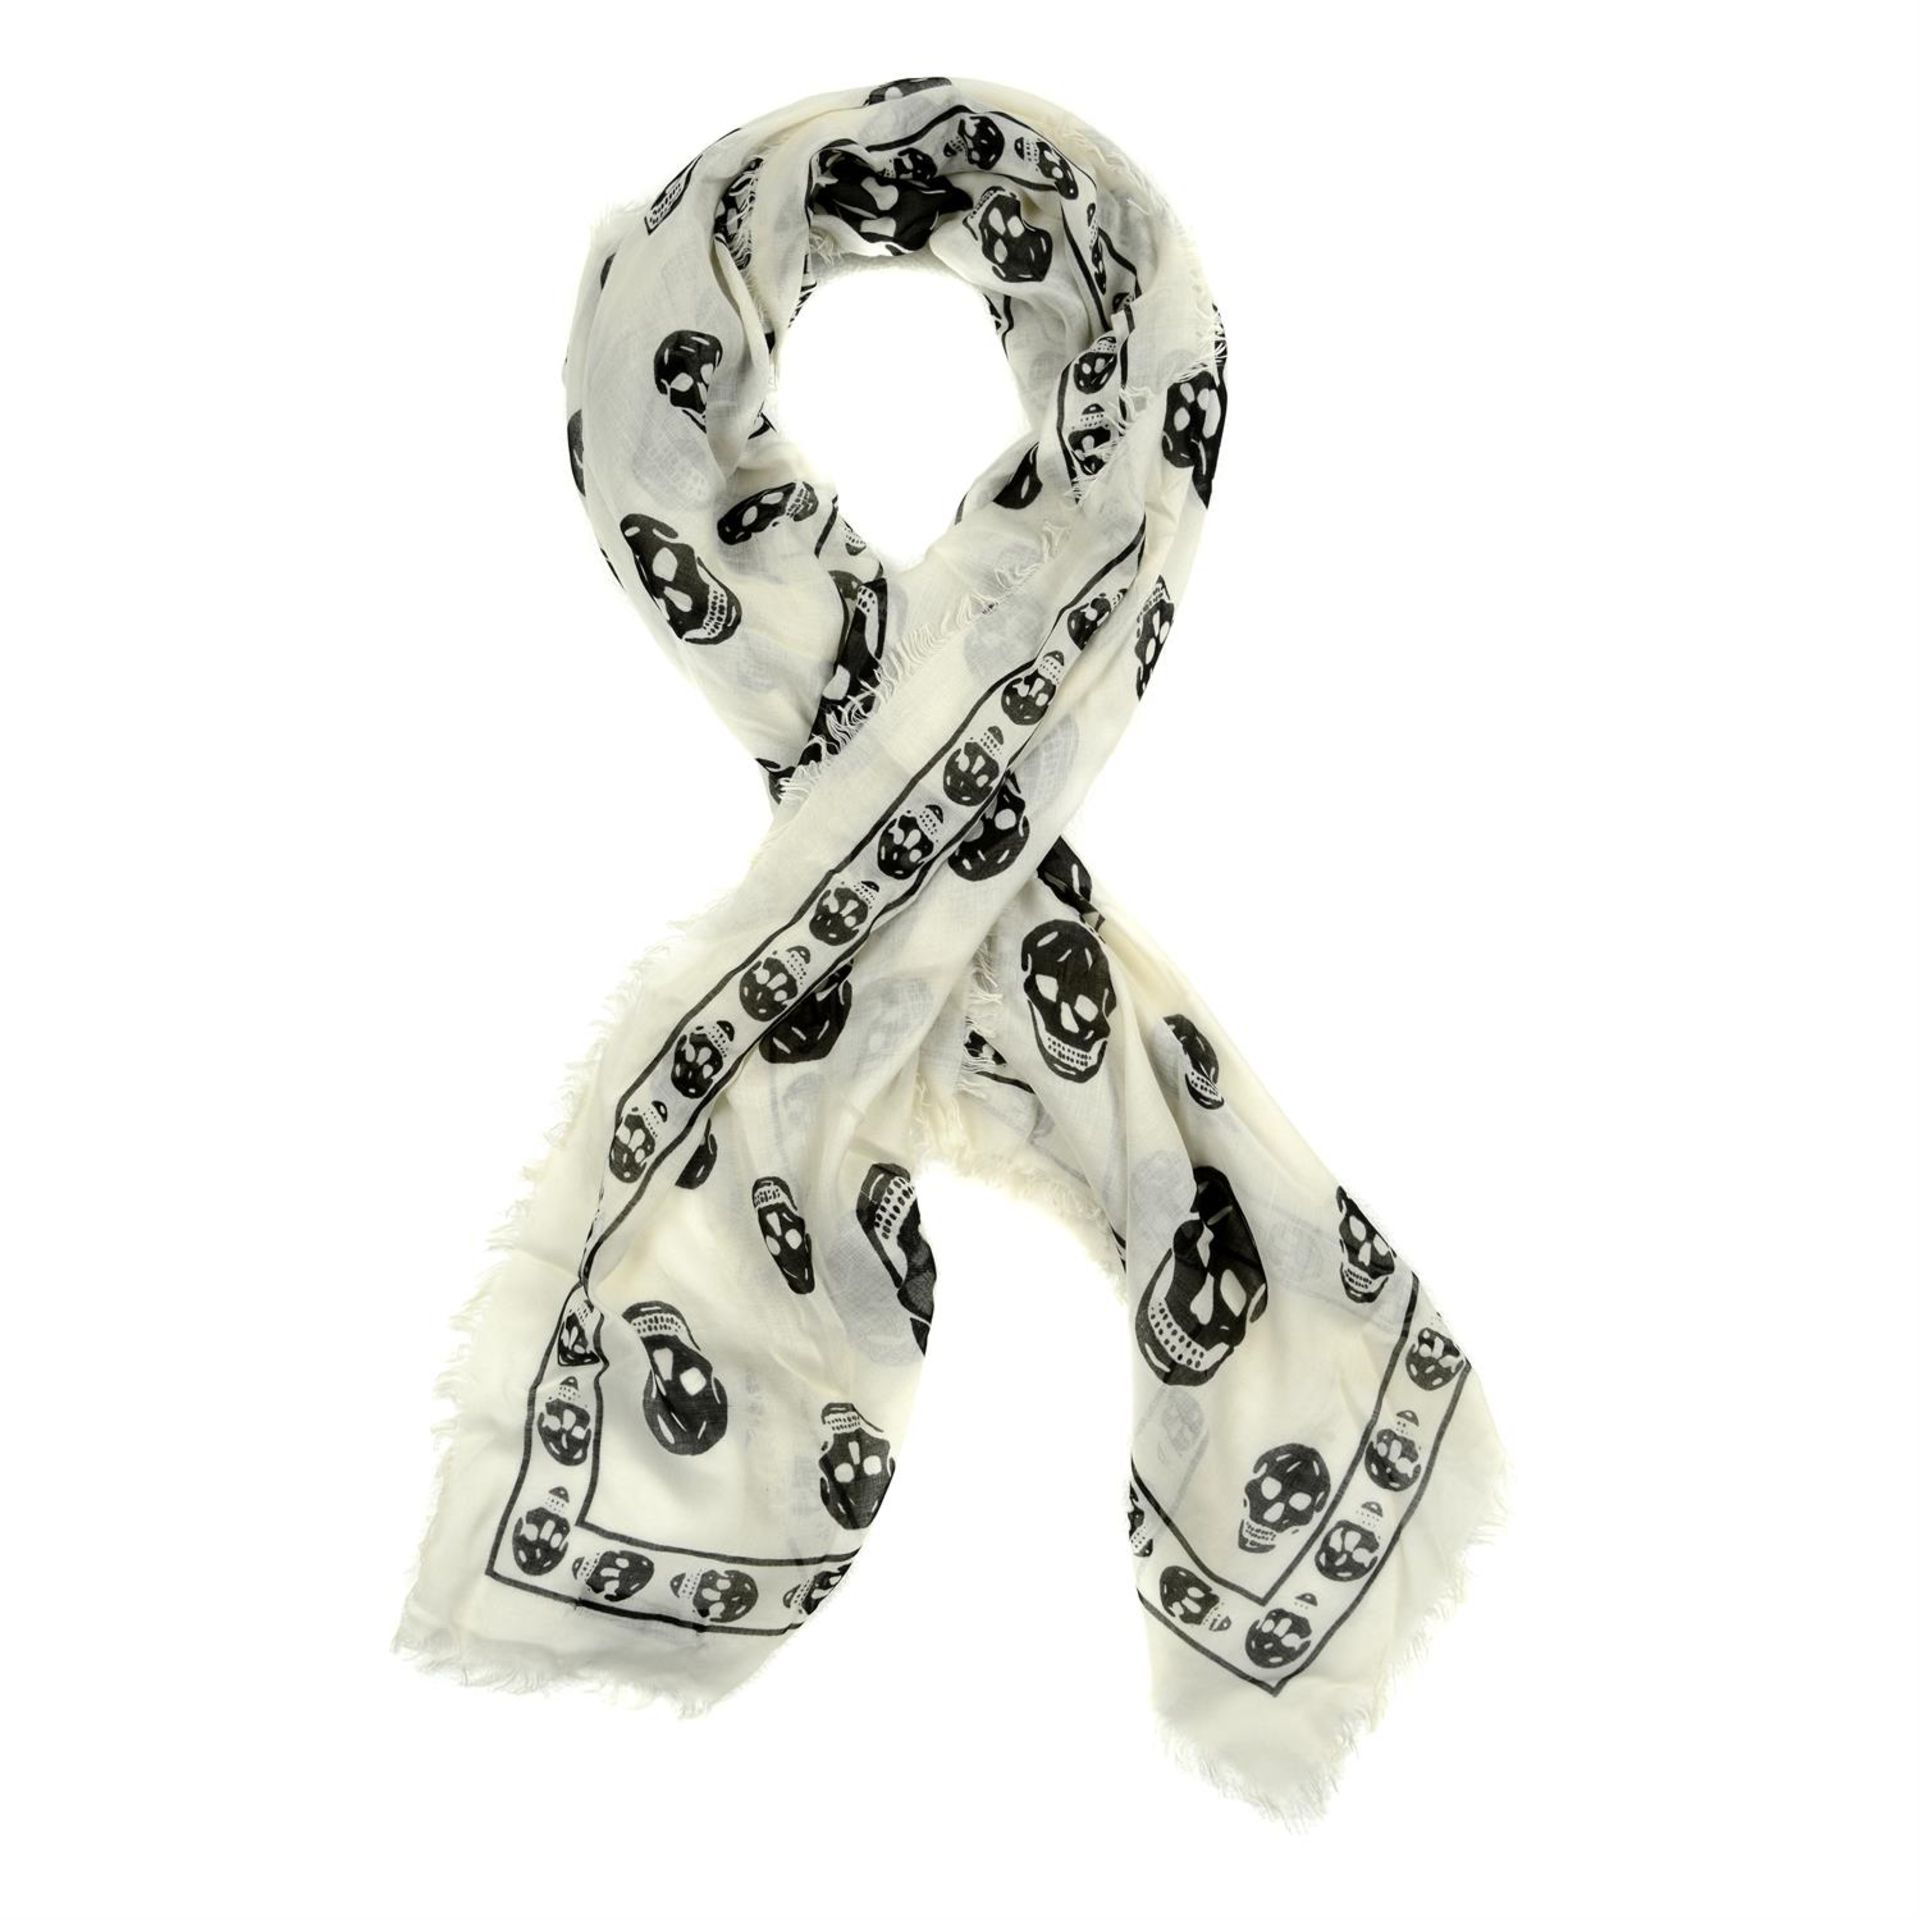 ALEXANDER MCQUEEN - a white and black skull scarf. - Image 2 of 2